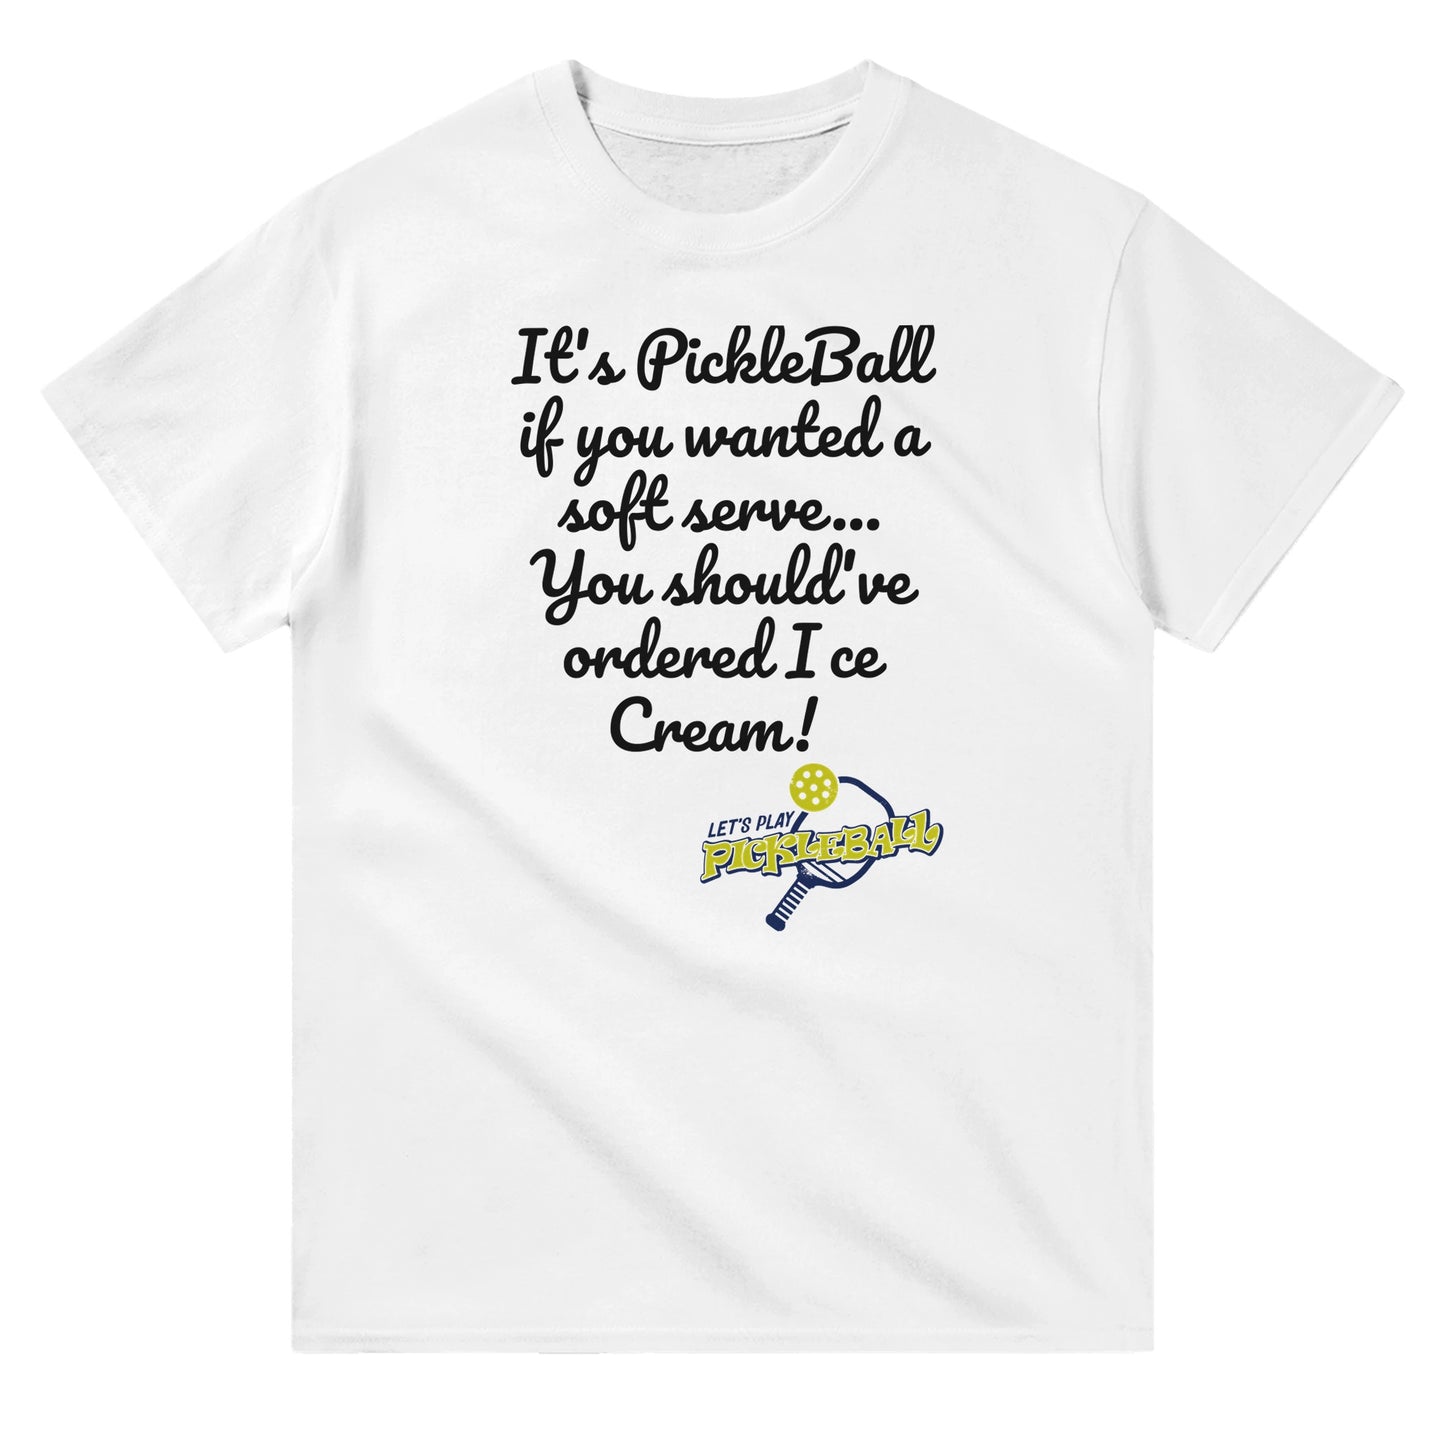 A white comfortable Unisex Crewneck heavyweight cotton t-shirt with funny saying It’s PickleBall if you wanted a soft serve… You should’ve ordered Ice Cream! and Let’s Play Pickleball logo on the front from WhatYa Say Apparel  lying flat.